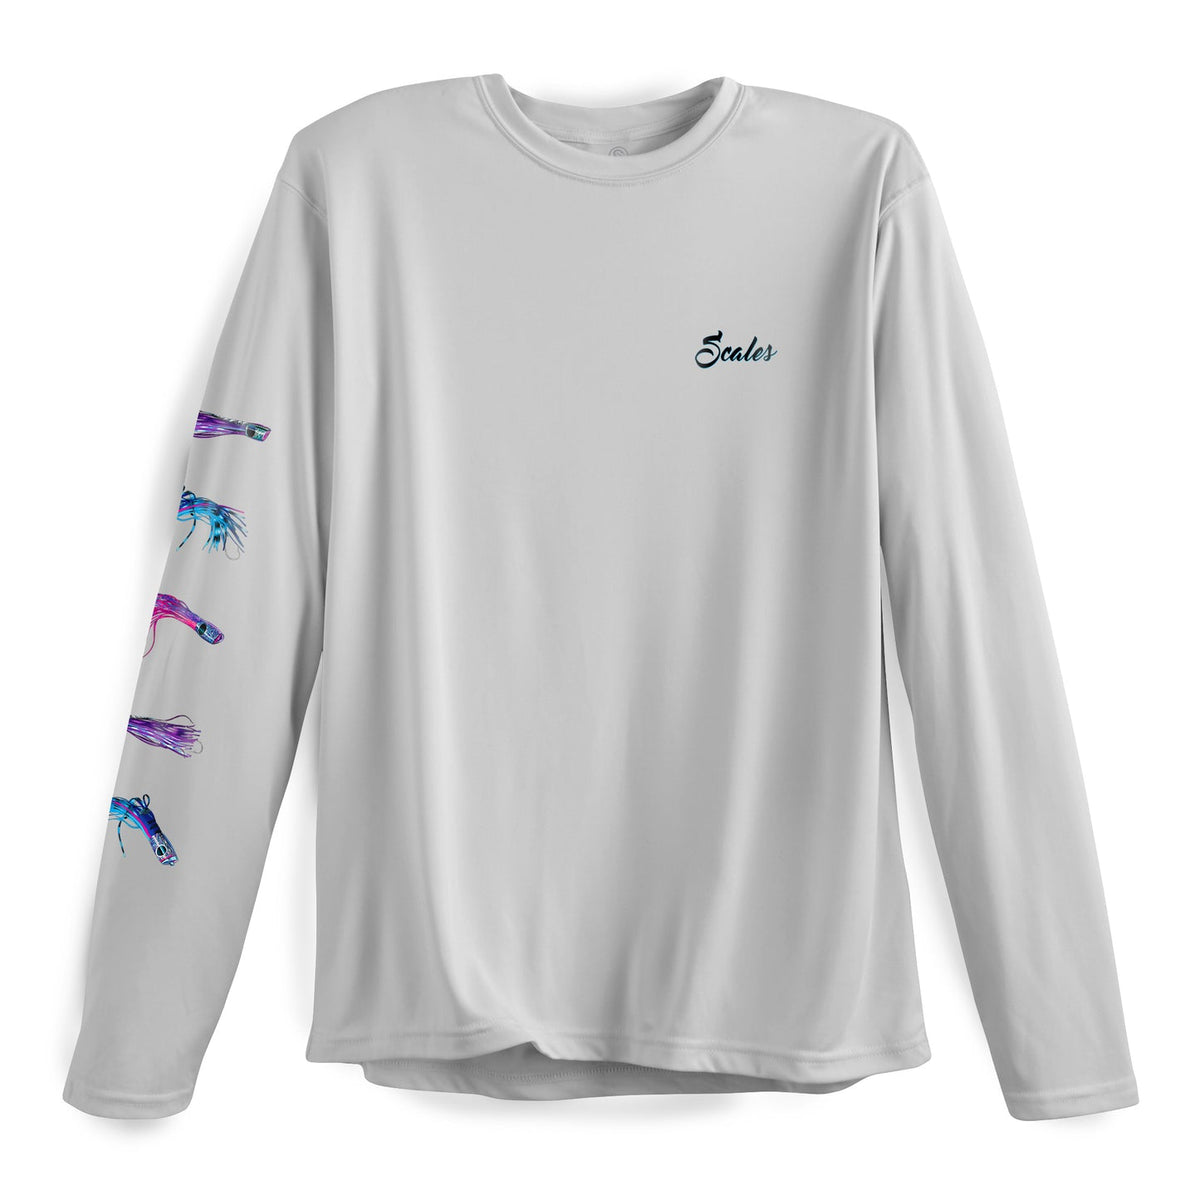 SCALES Chasing Skirts Long Sleeve Performance Shirt